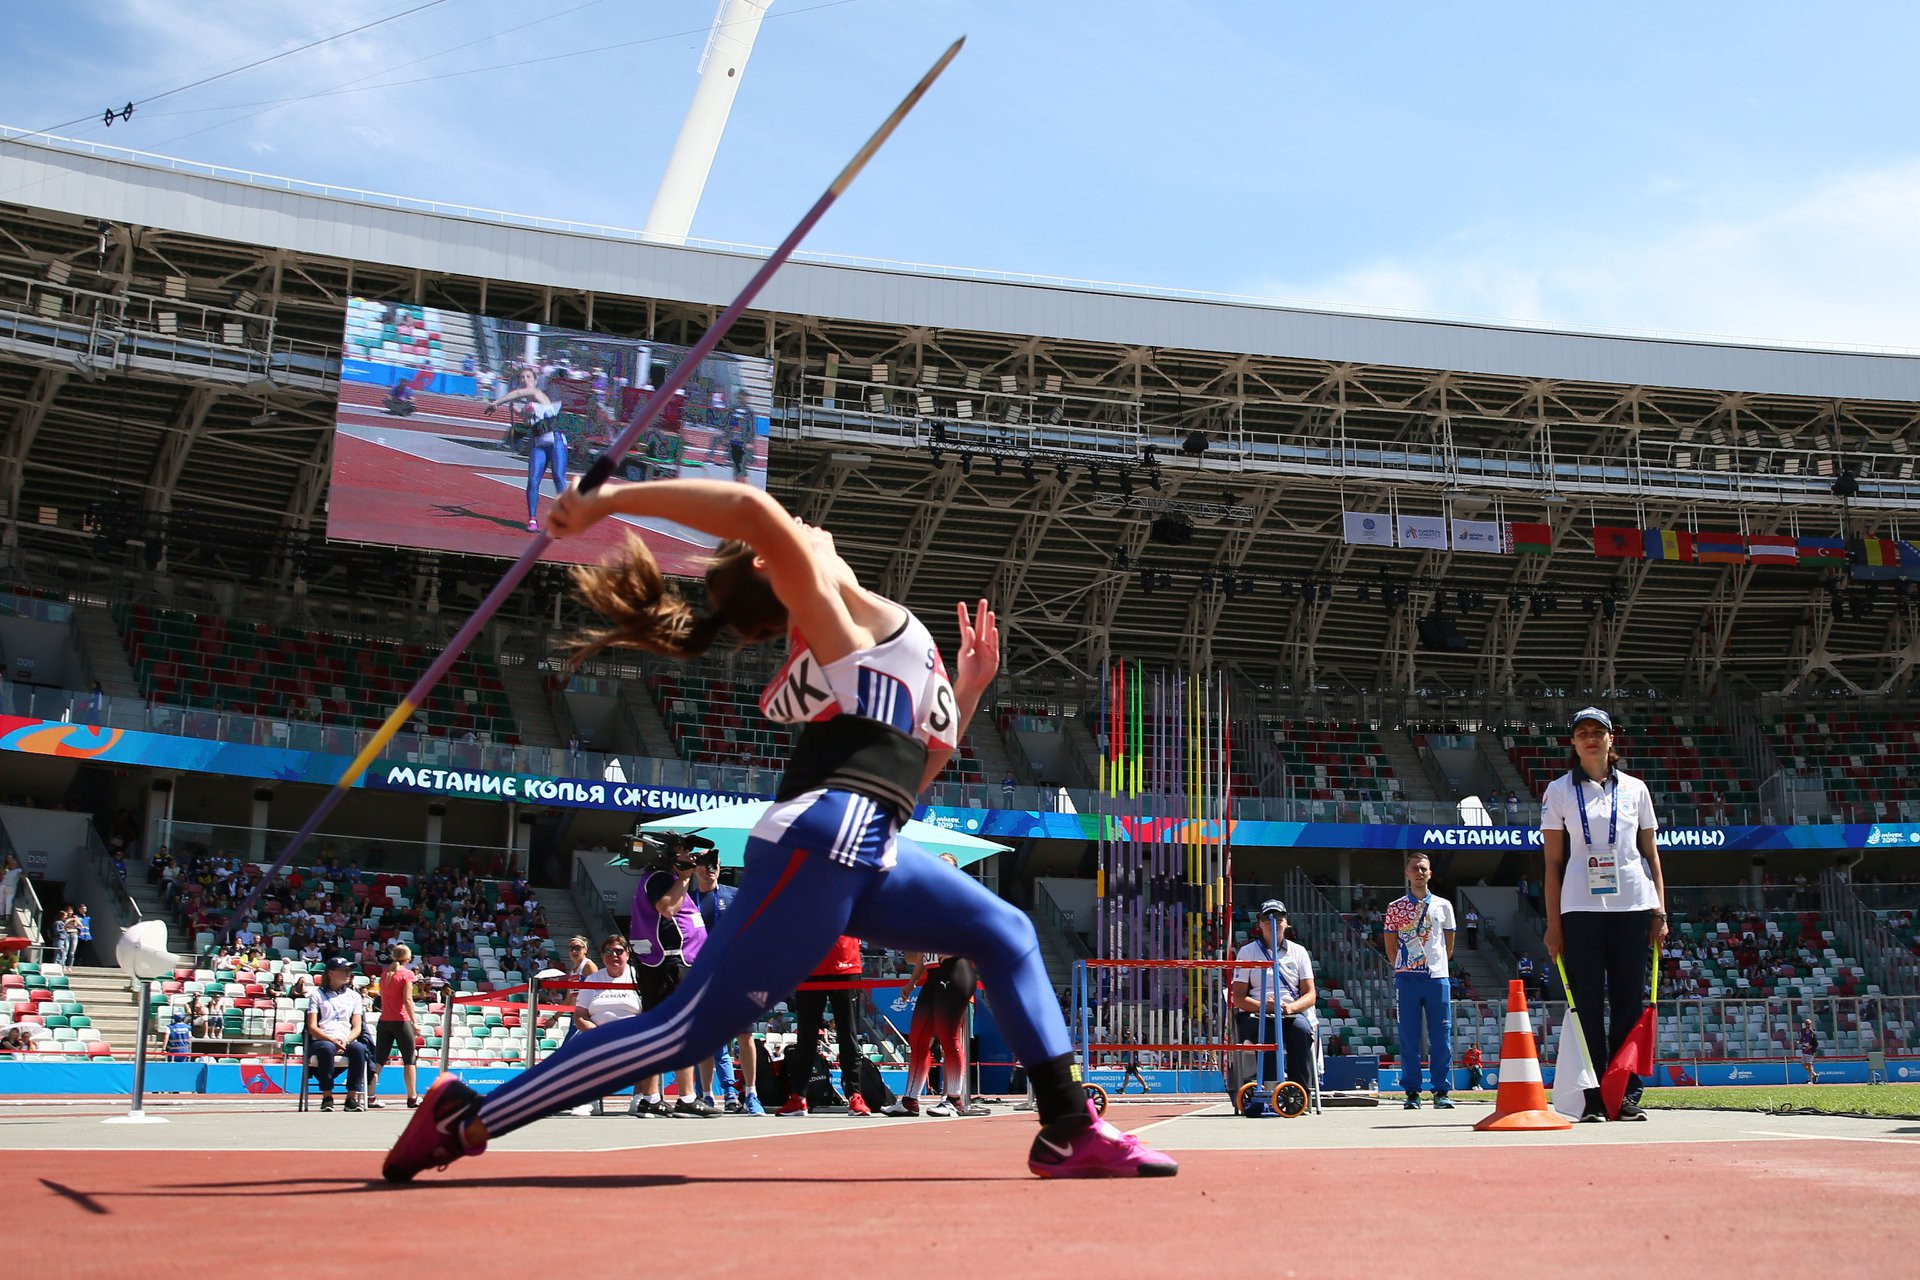 It was a competitive debut for Dynamic New Athletics, which sees athletes compete in teams across track and field events ©Minsk 2019